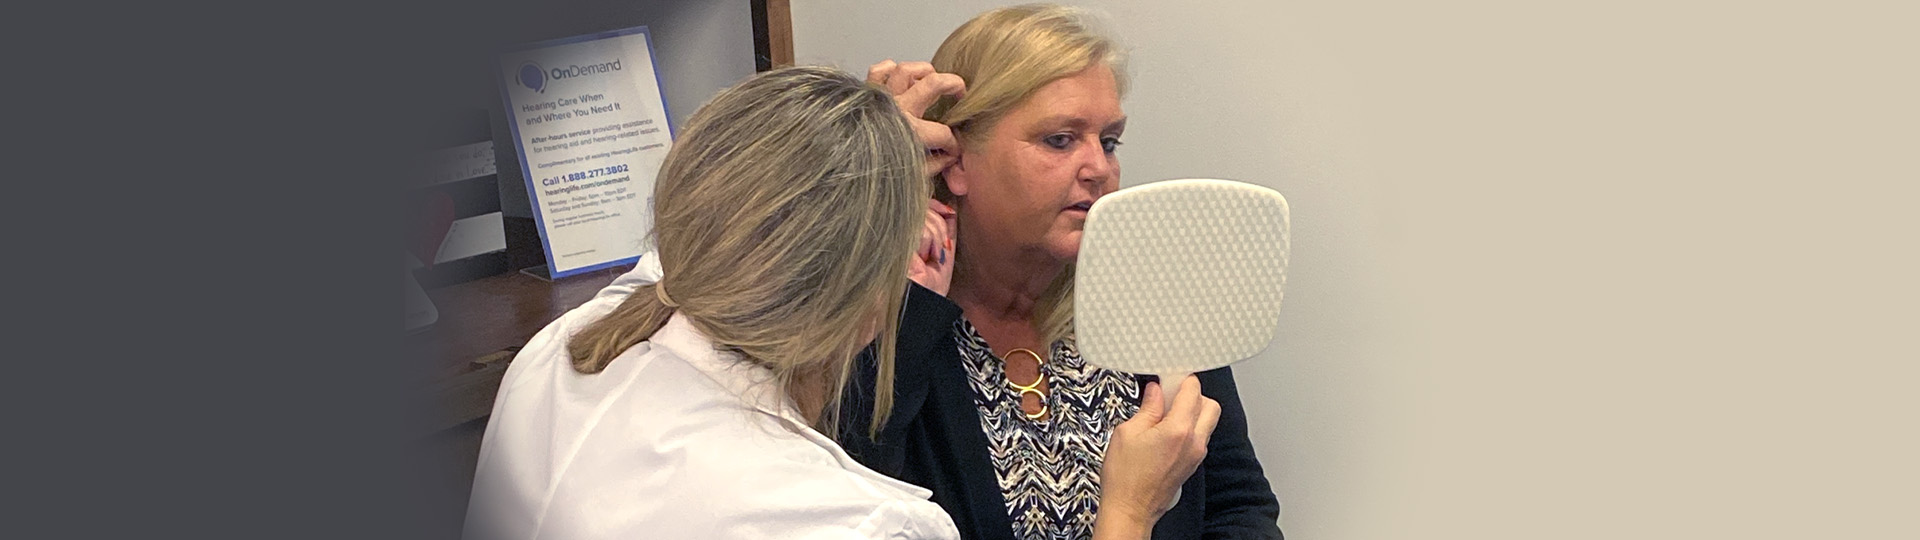 Angela Taylor gets fitted with new hearing aids 